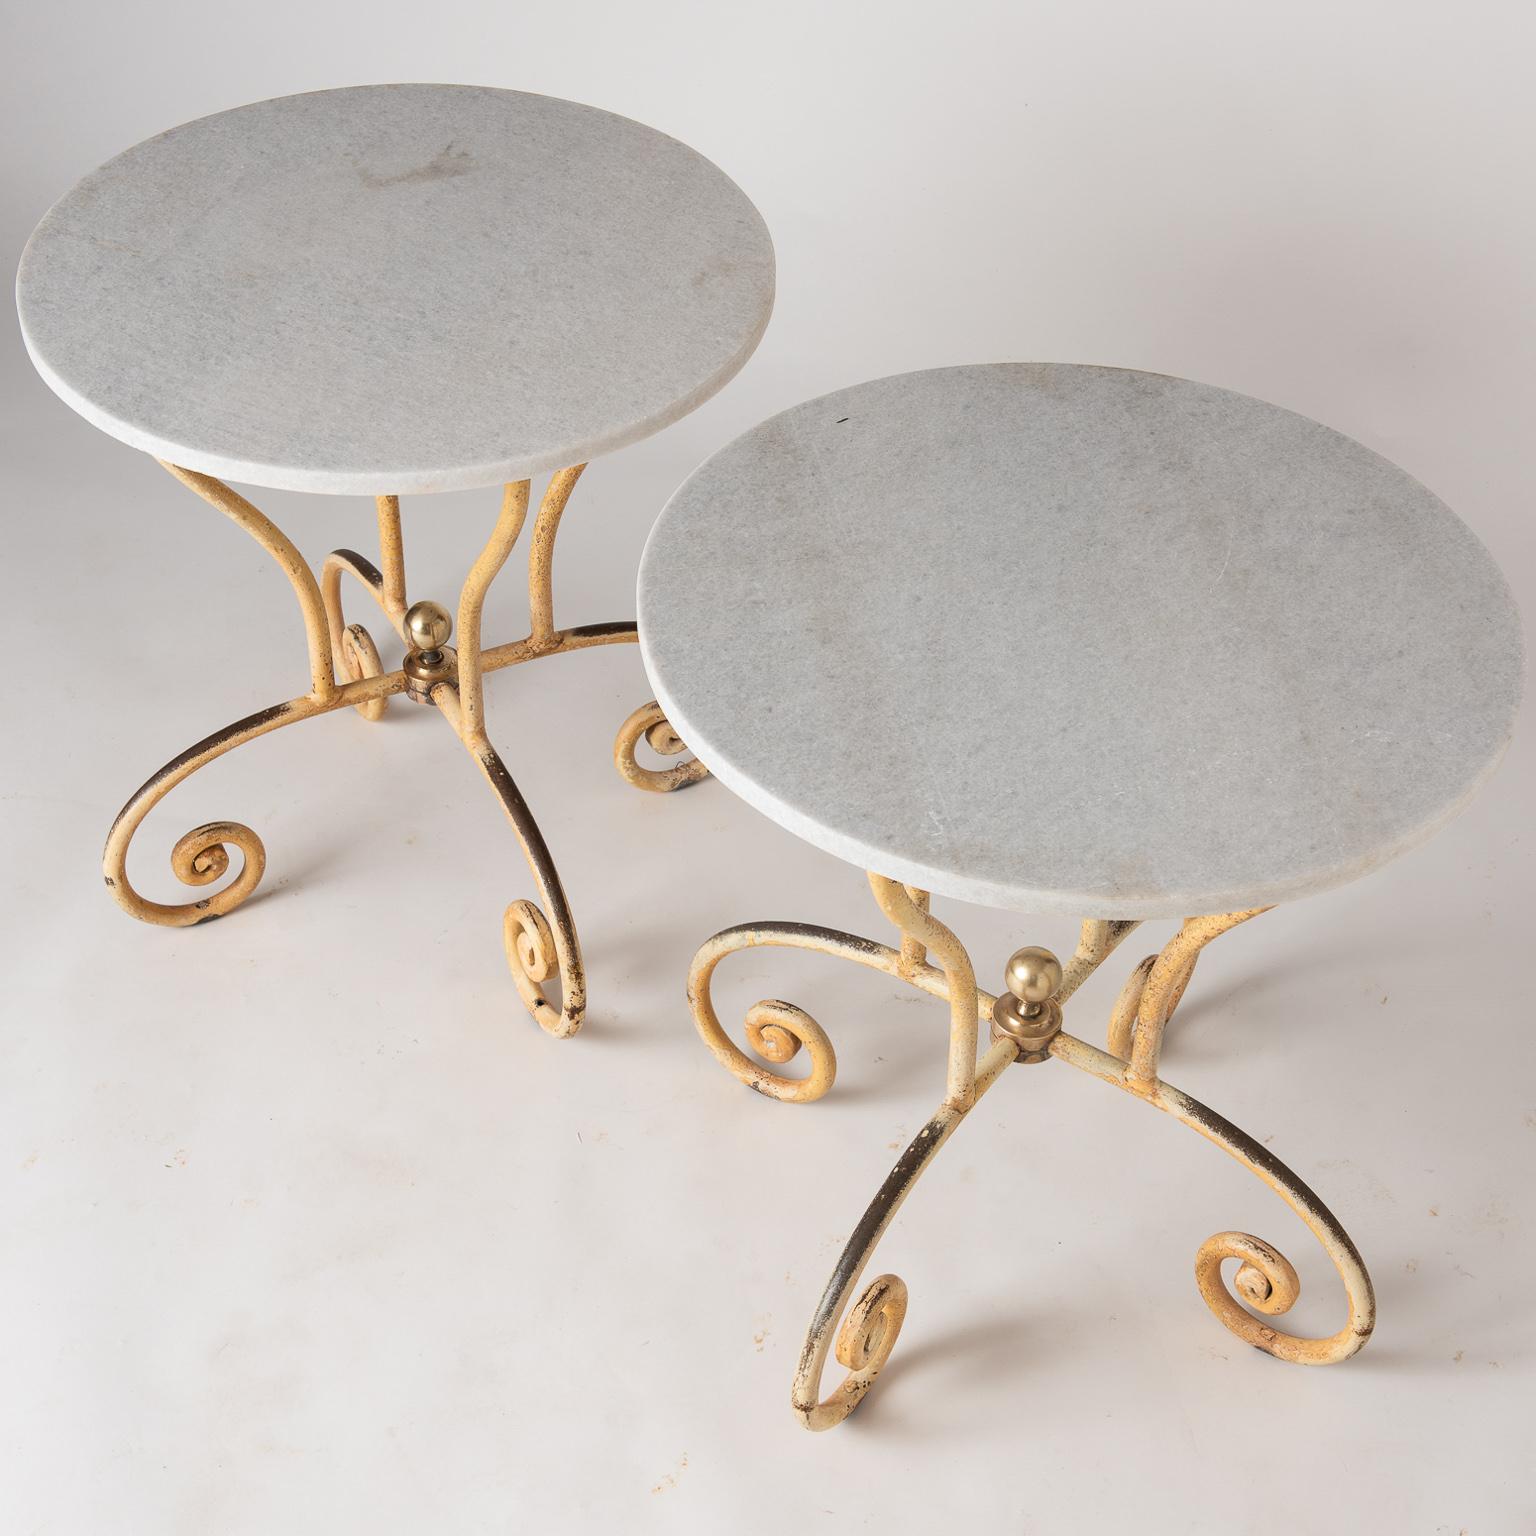 These chic, 20th century tables with curving iron bases in old yellow paint, are joined by a central brass fitting, topped with a brass finial. The round shaped marble is in perfect condition and the tables will work beautifully as cocktail